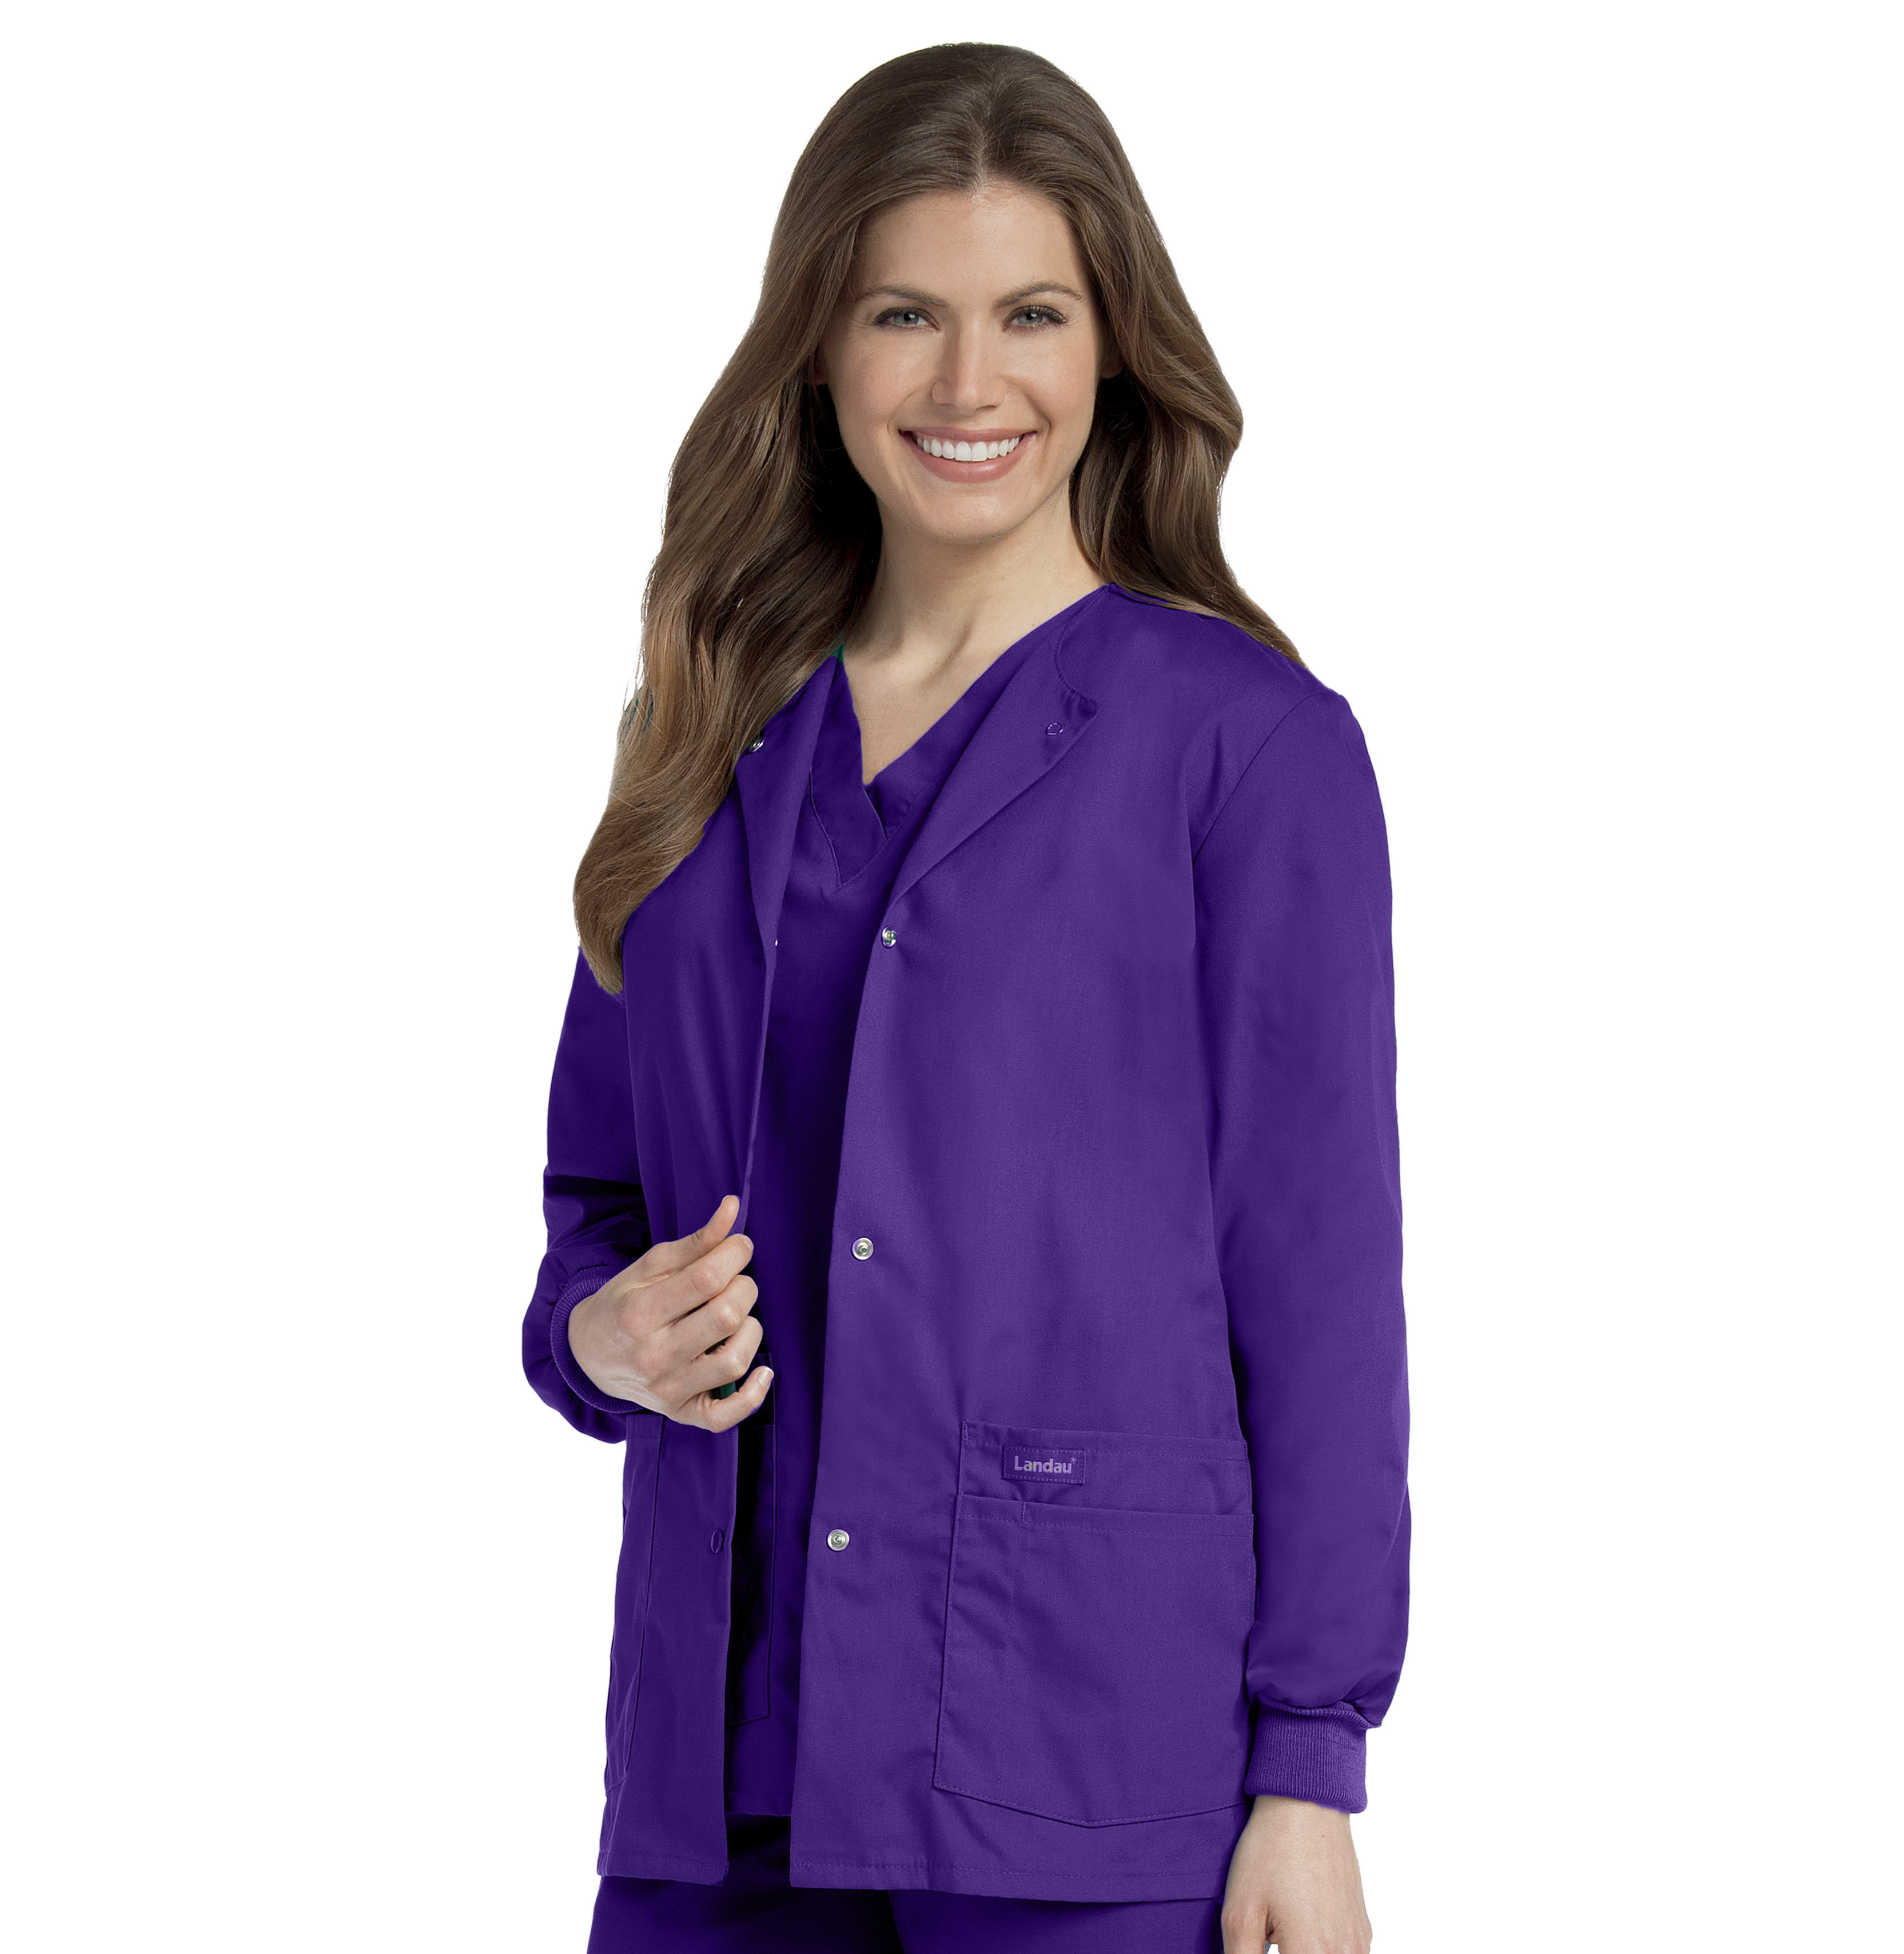 Landau Essentials Relaxed Fit 4-Pocket Snap-Front Scrub Jacket for Women 7525 - image 1 of 6